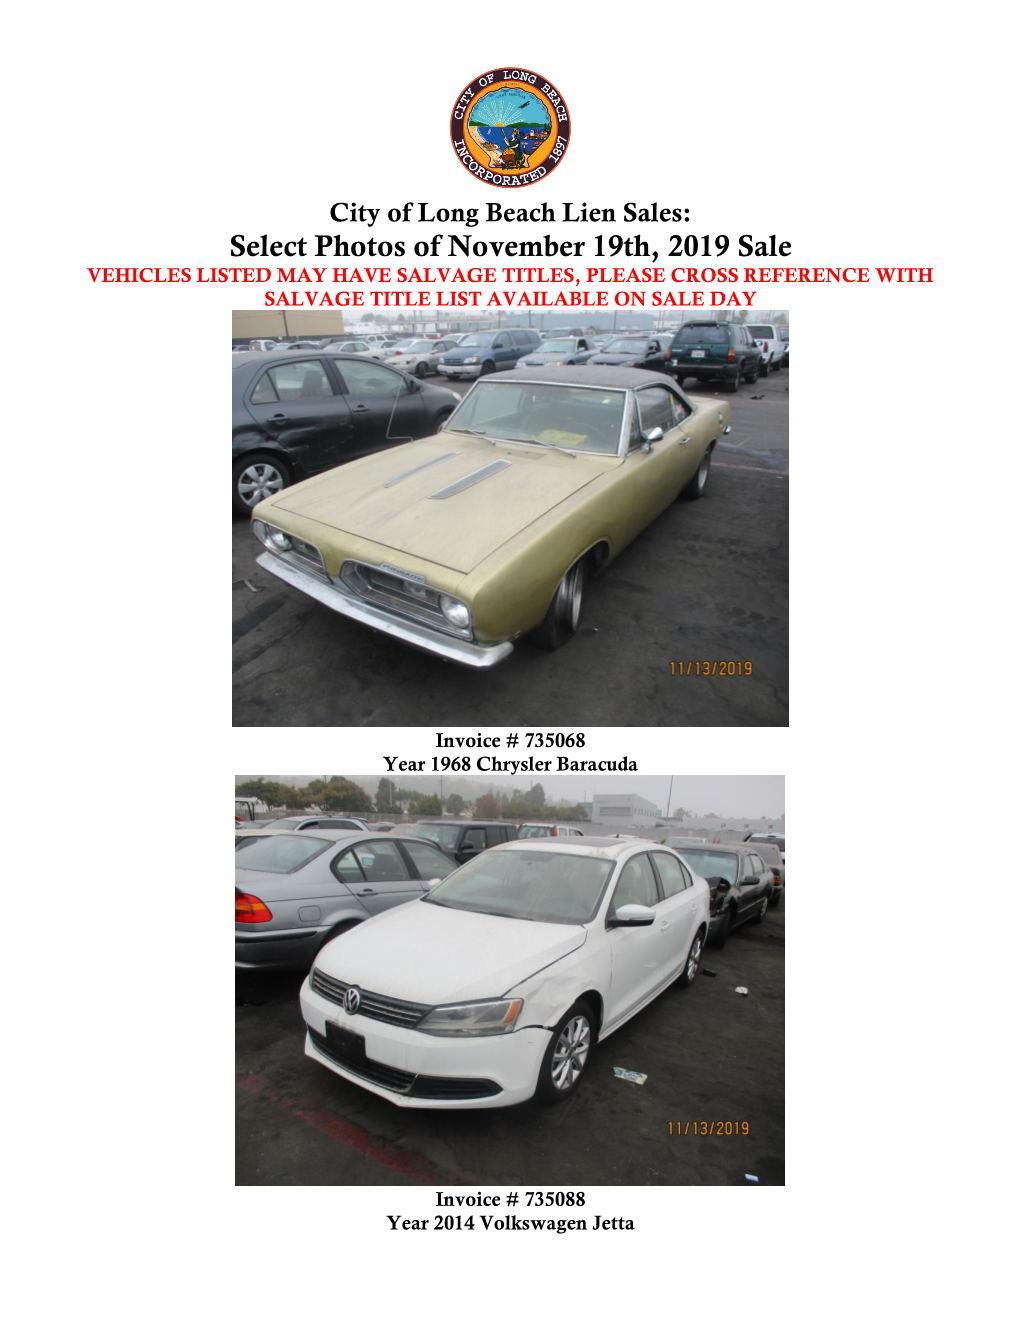 Select Photos of November 19Th, 2019 Sale VEHICLES LISTED MAY HAVE SALVAGE TITLES, PLEASE CROSS REFERENCE with SALVAGE TITLE LIST AVAILABLE on SALE DAY